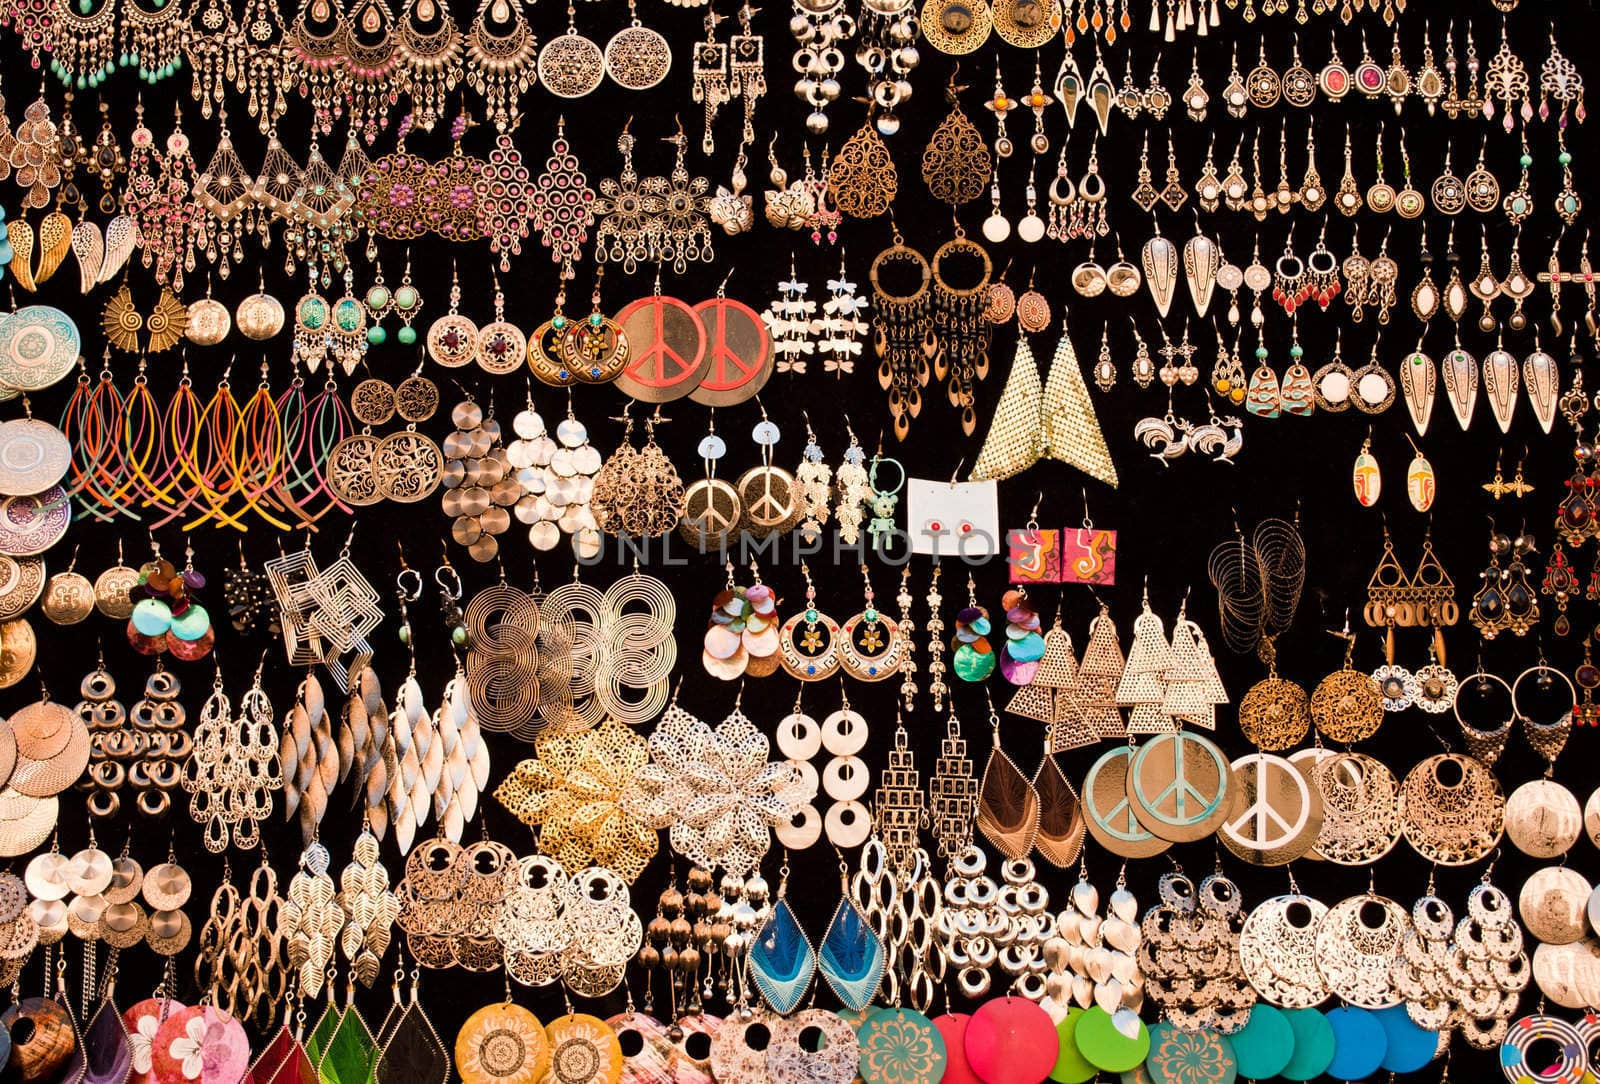 Jewelry stand by robertblaga